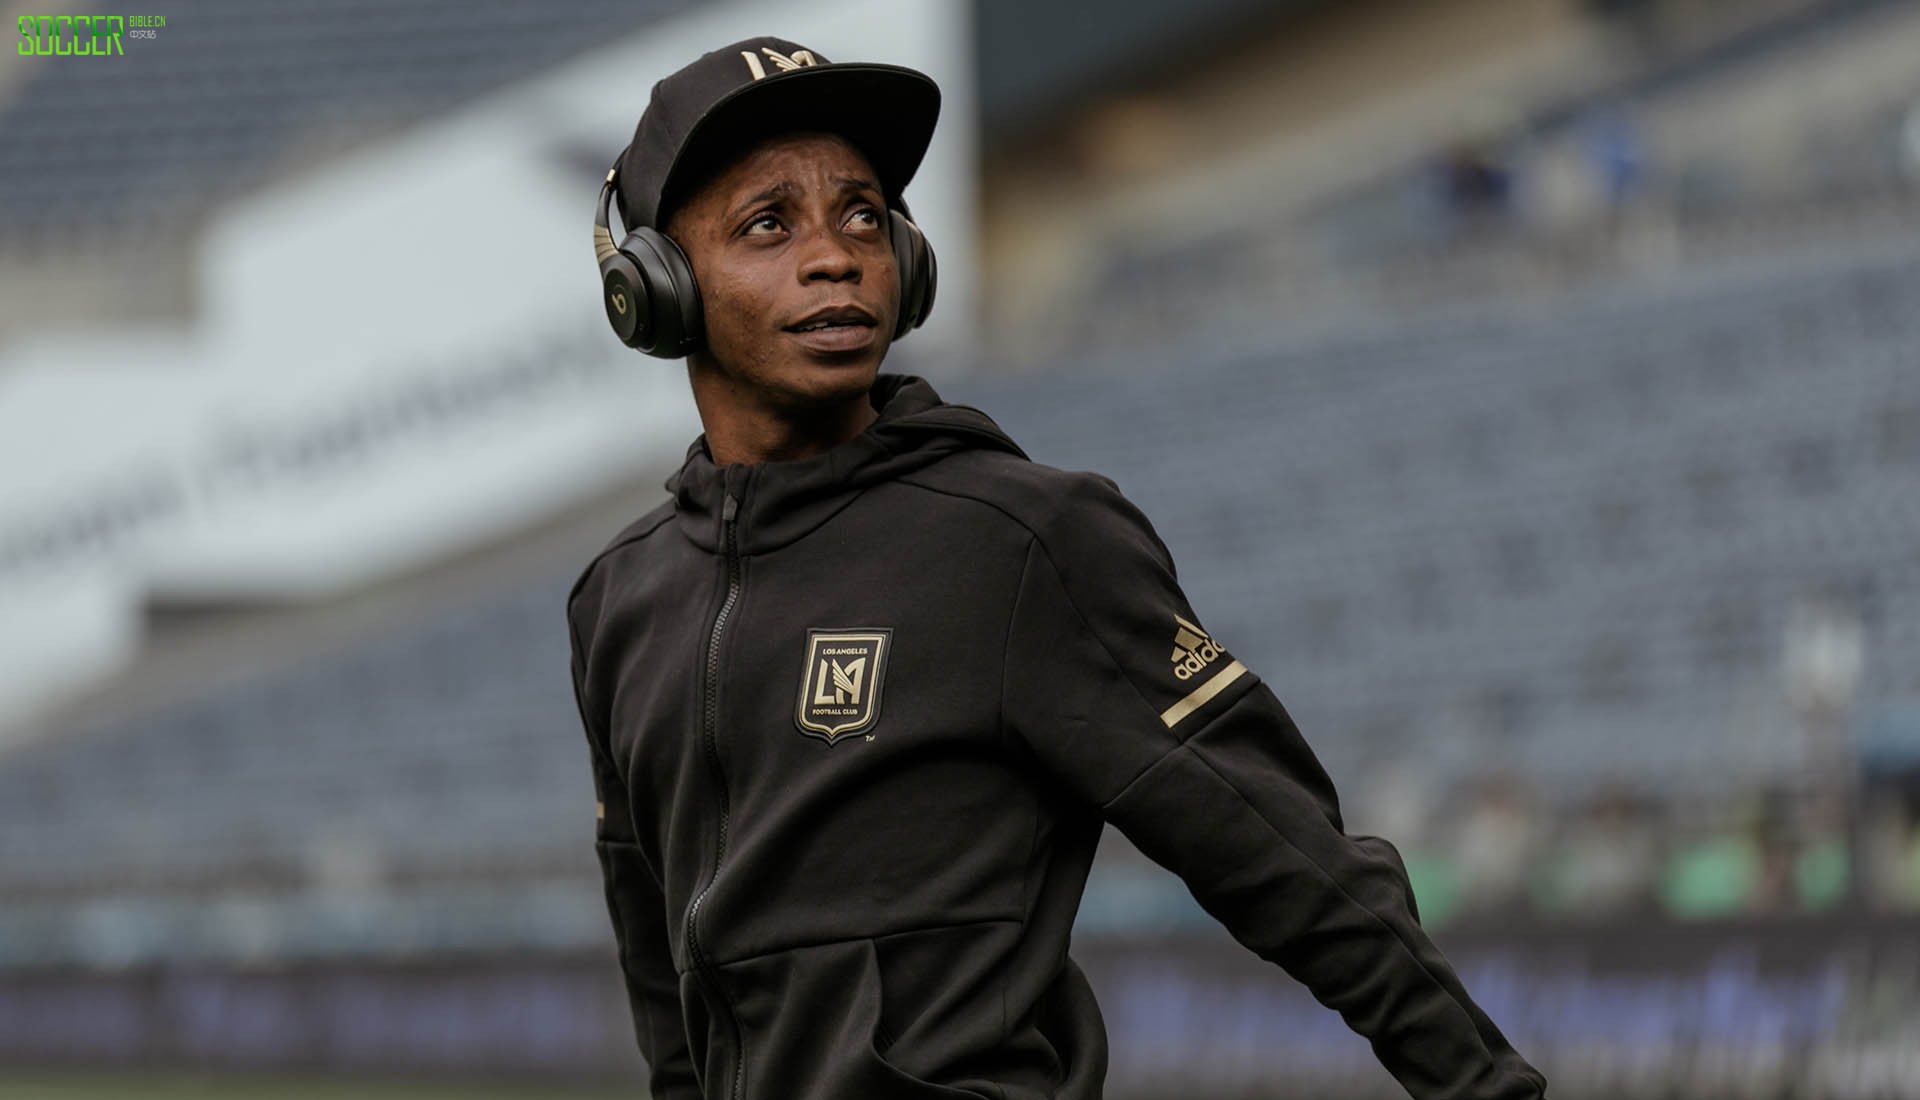 lafc-first-win-soccerbible_0006_594a7070